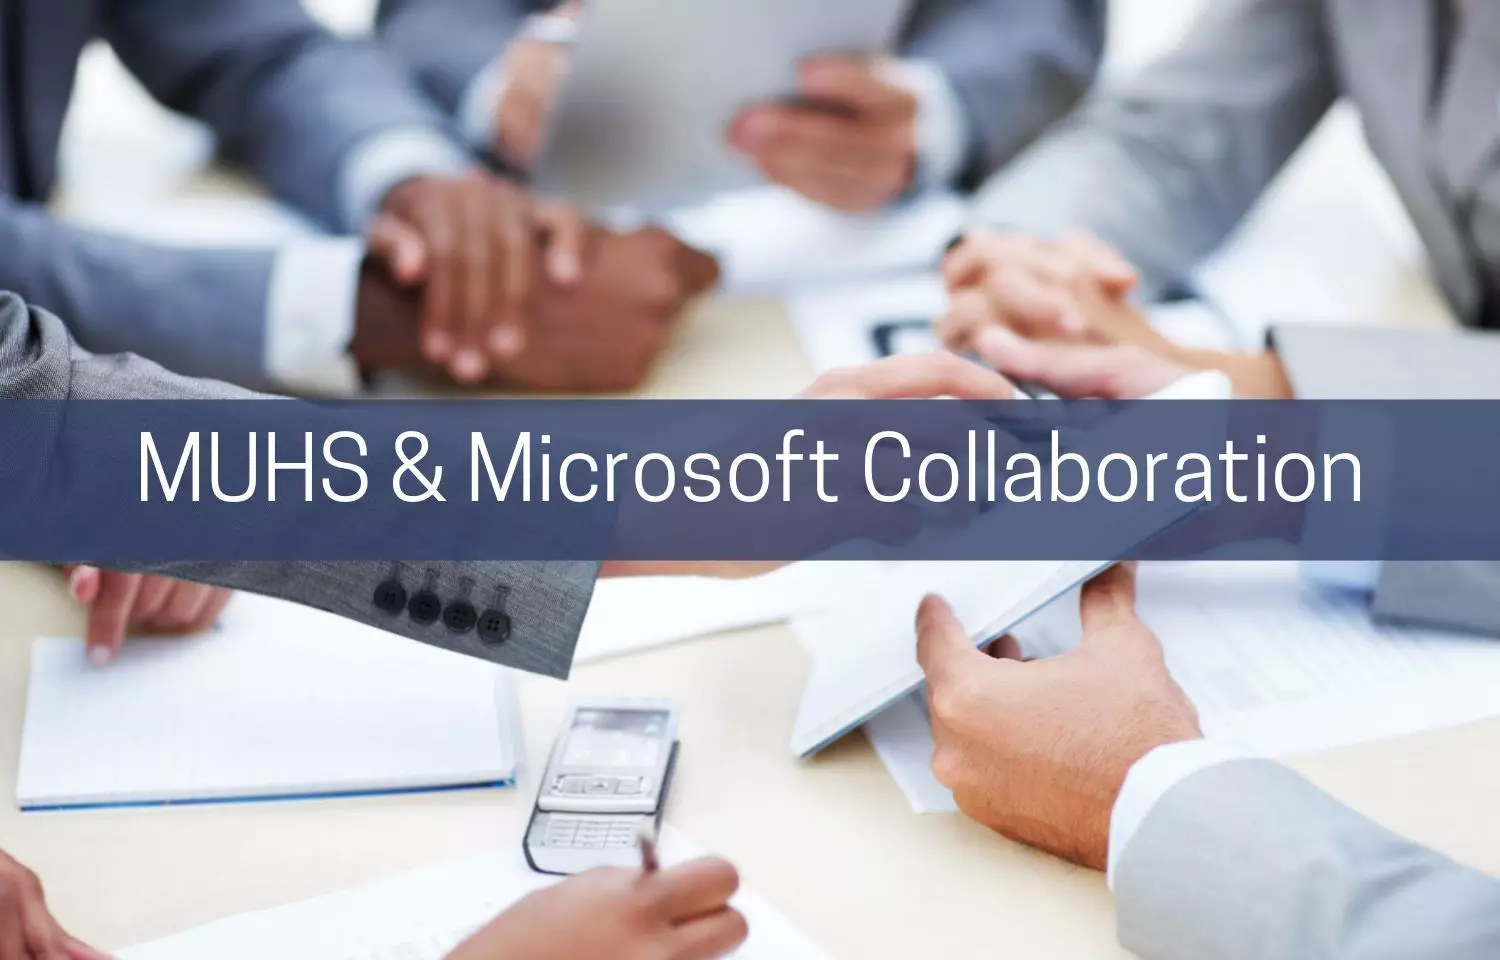 MUHS collaborates with Microsoft for digital innovation in medical education